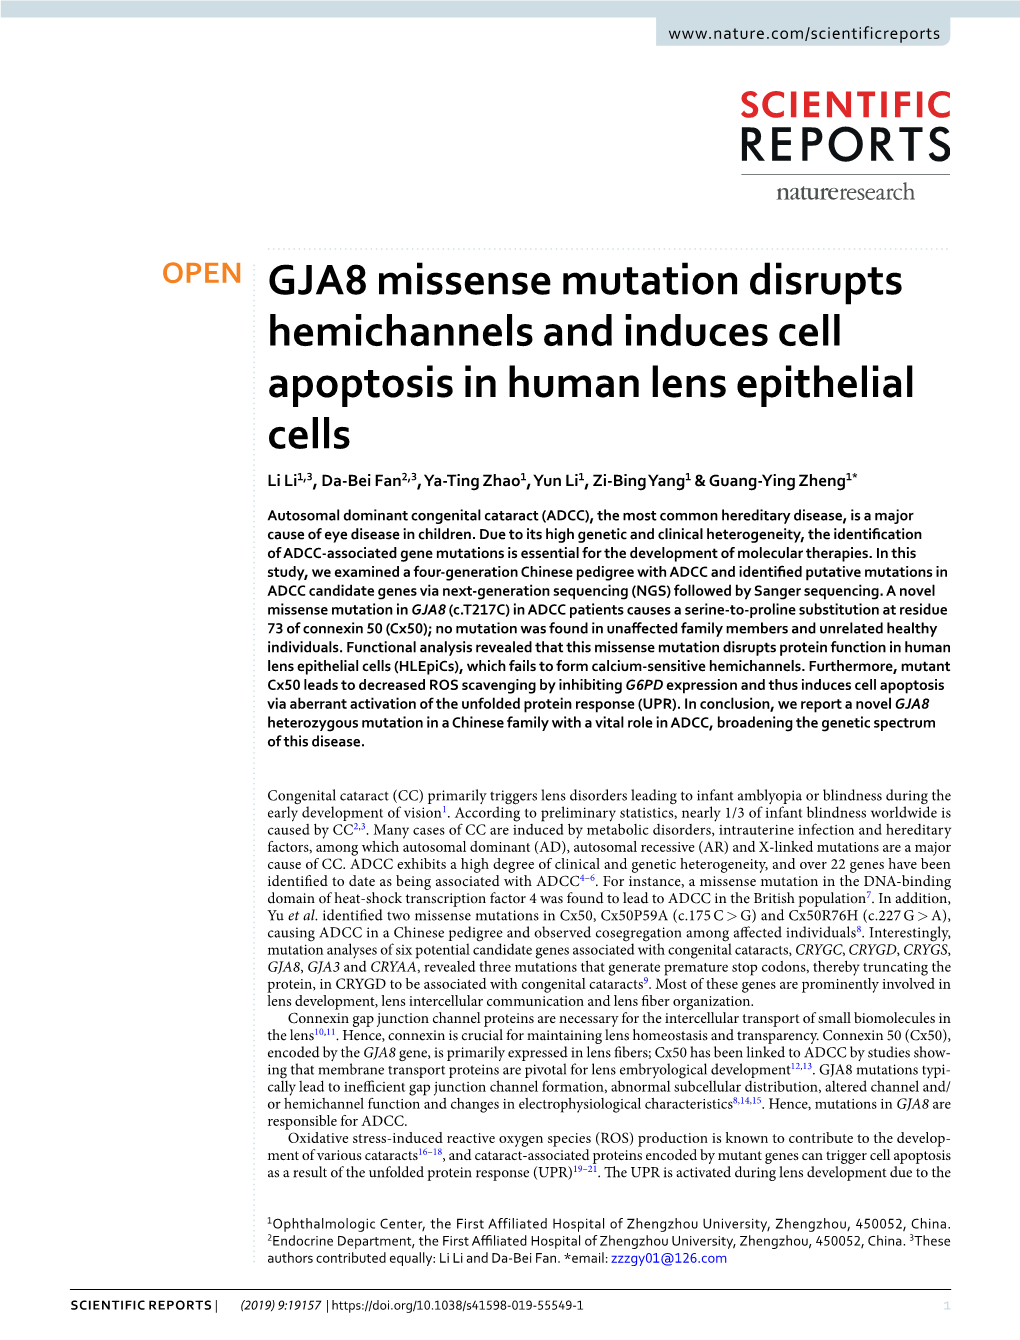 GJA8 Missense Mutation Disrupts Hemichannels and Induces Cell